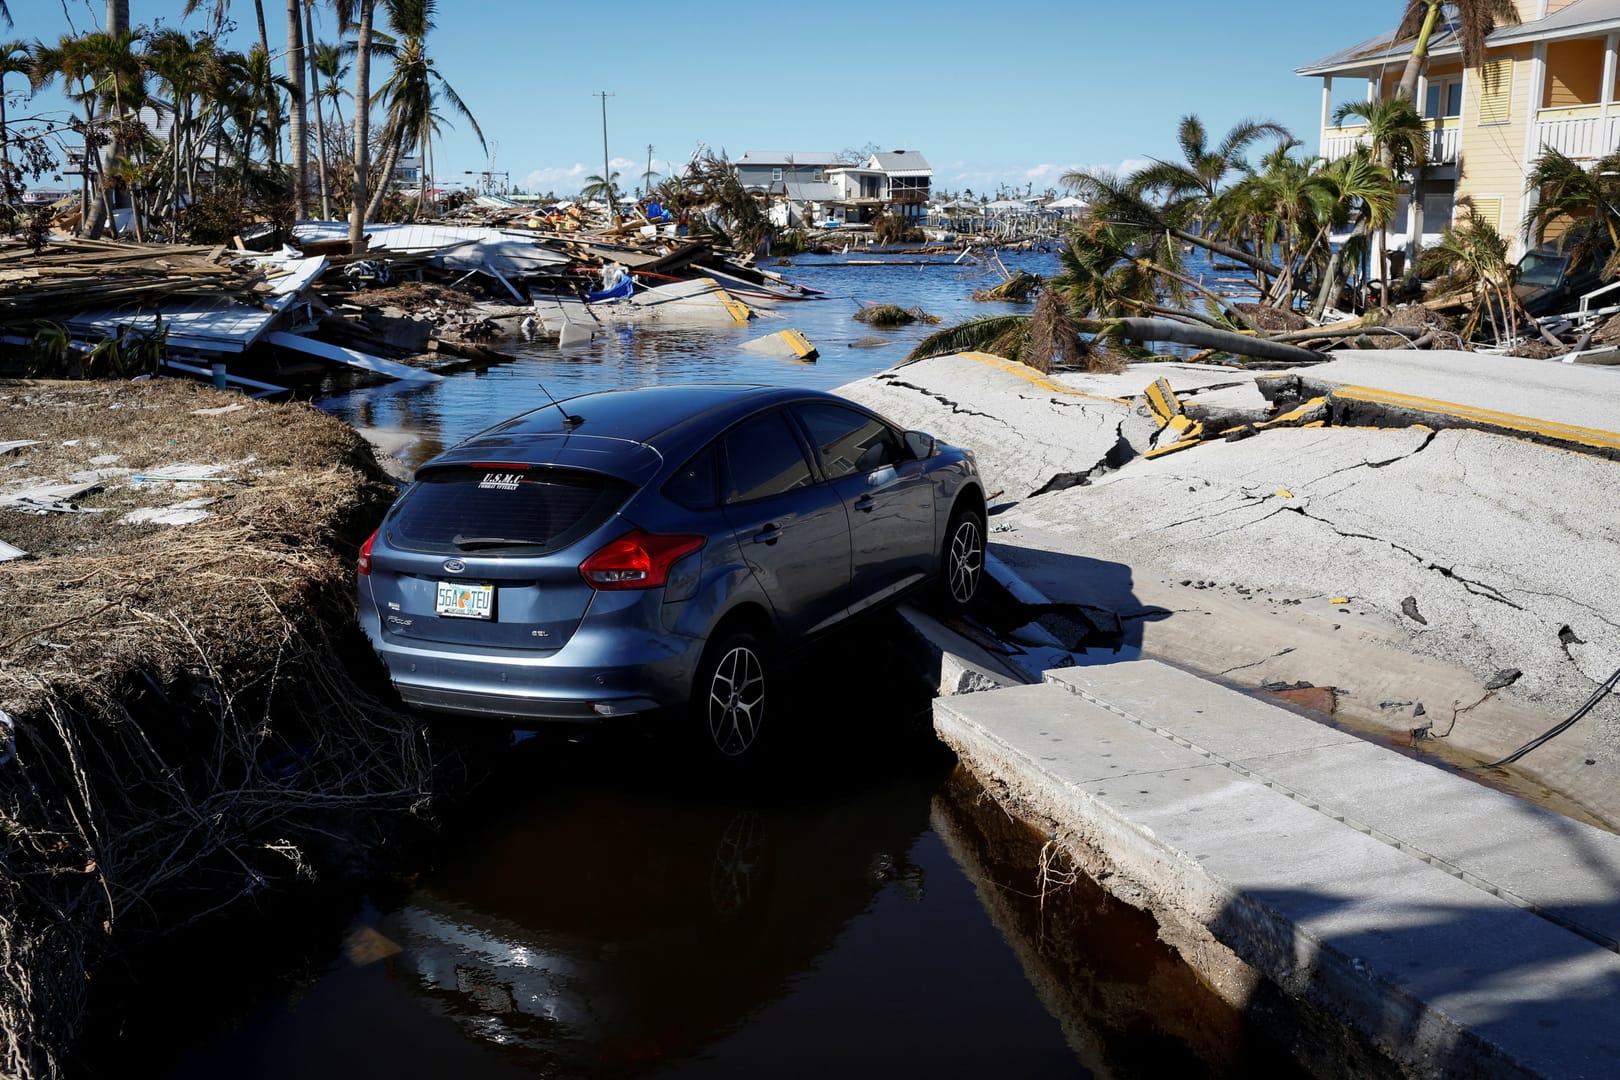 Florida continues with rescue efforts as Hurricane Ian heads north